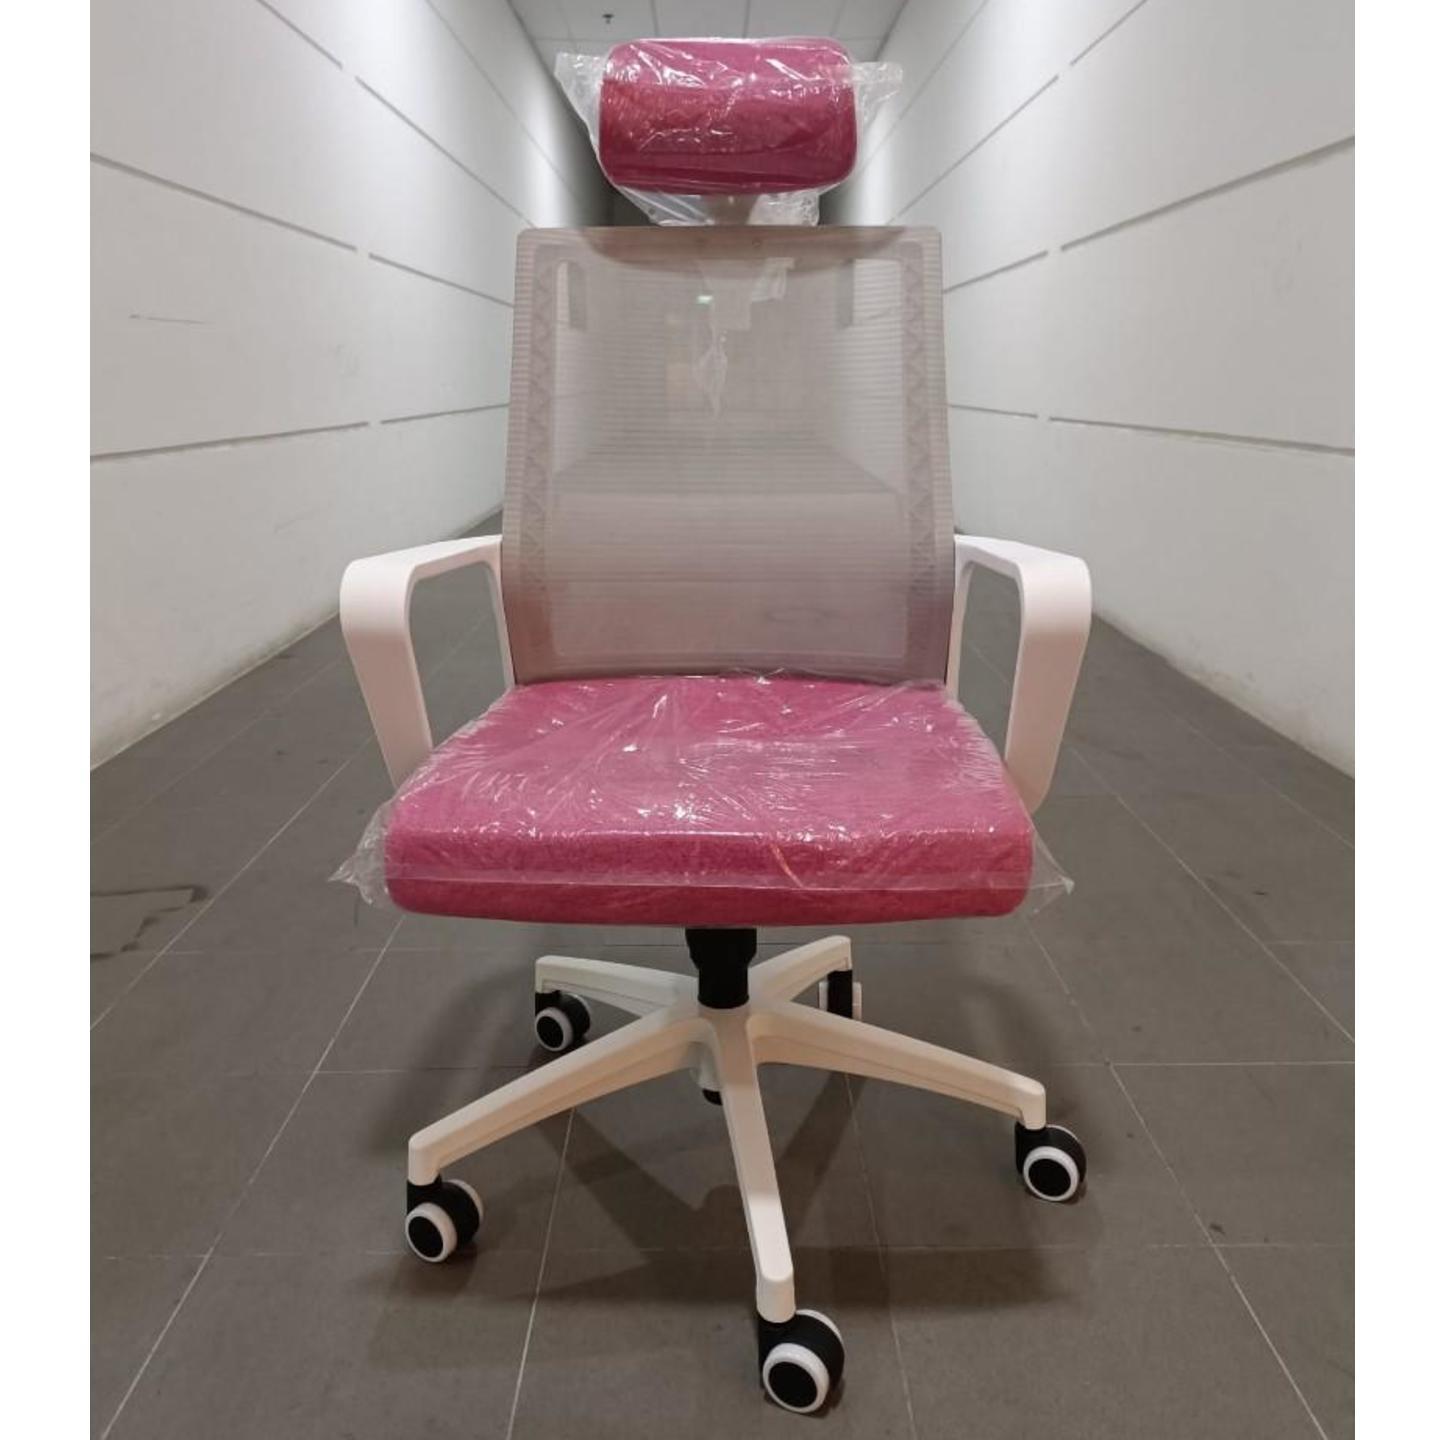 RAVER Ergo Office Chair in PINK